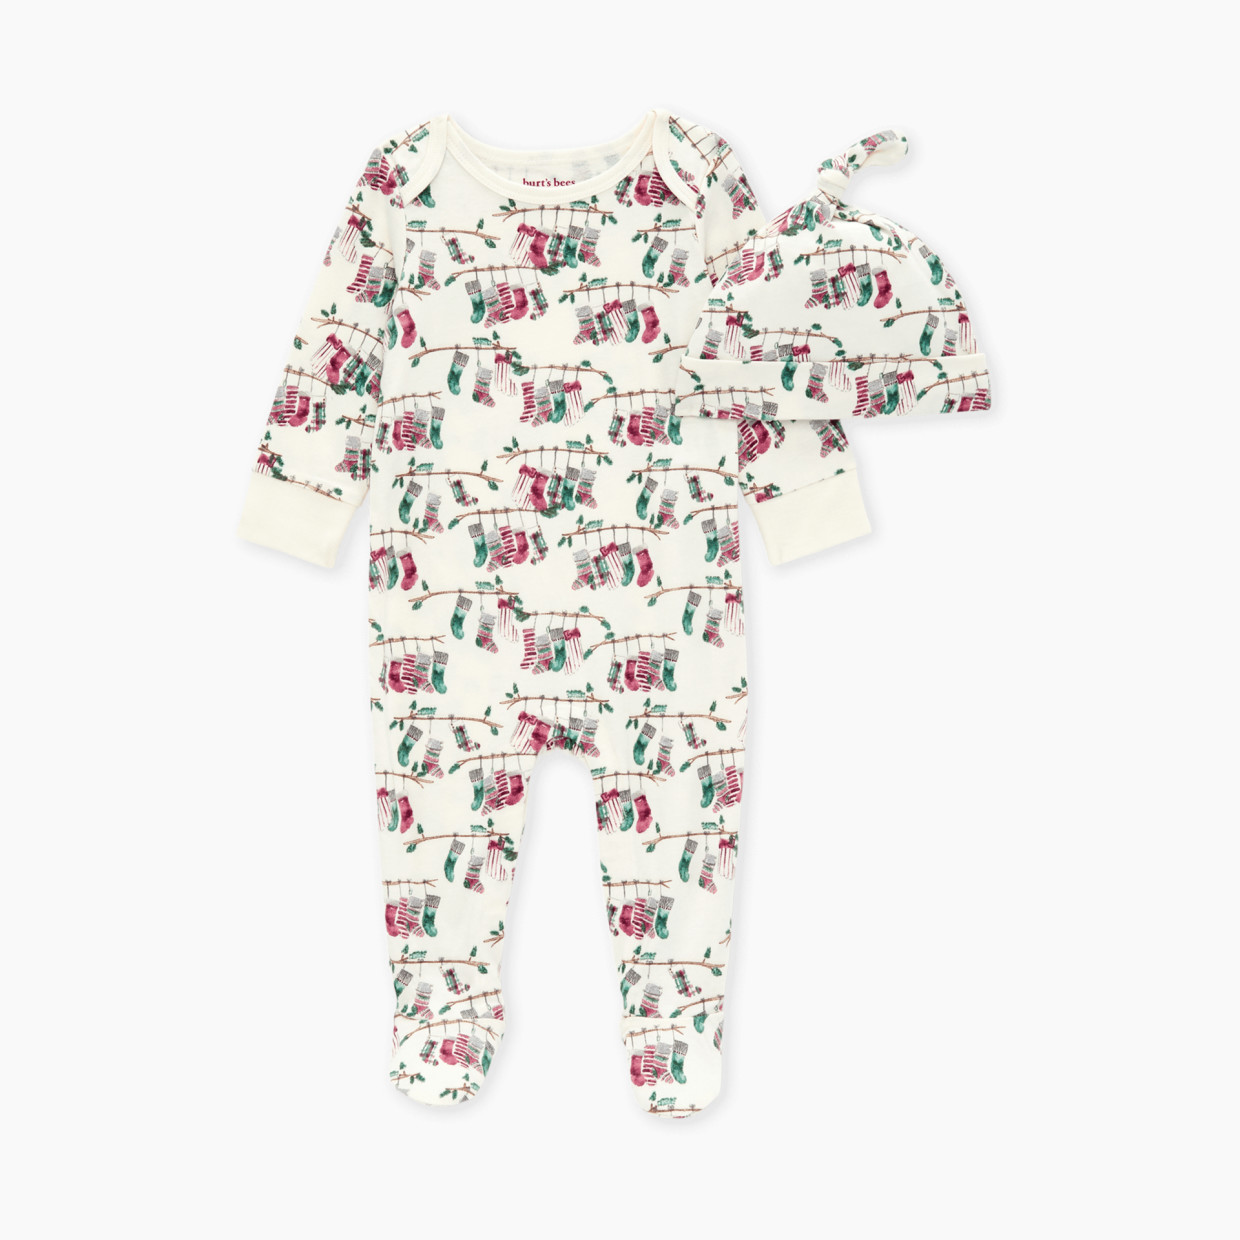 Burt's Bees Baby Footed Jumpsuit & Knot Top Hat Set - Our Stockings, Newborn.